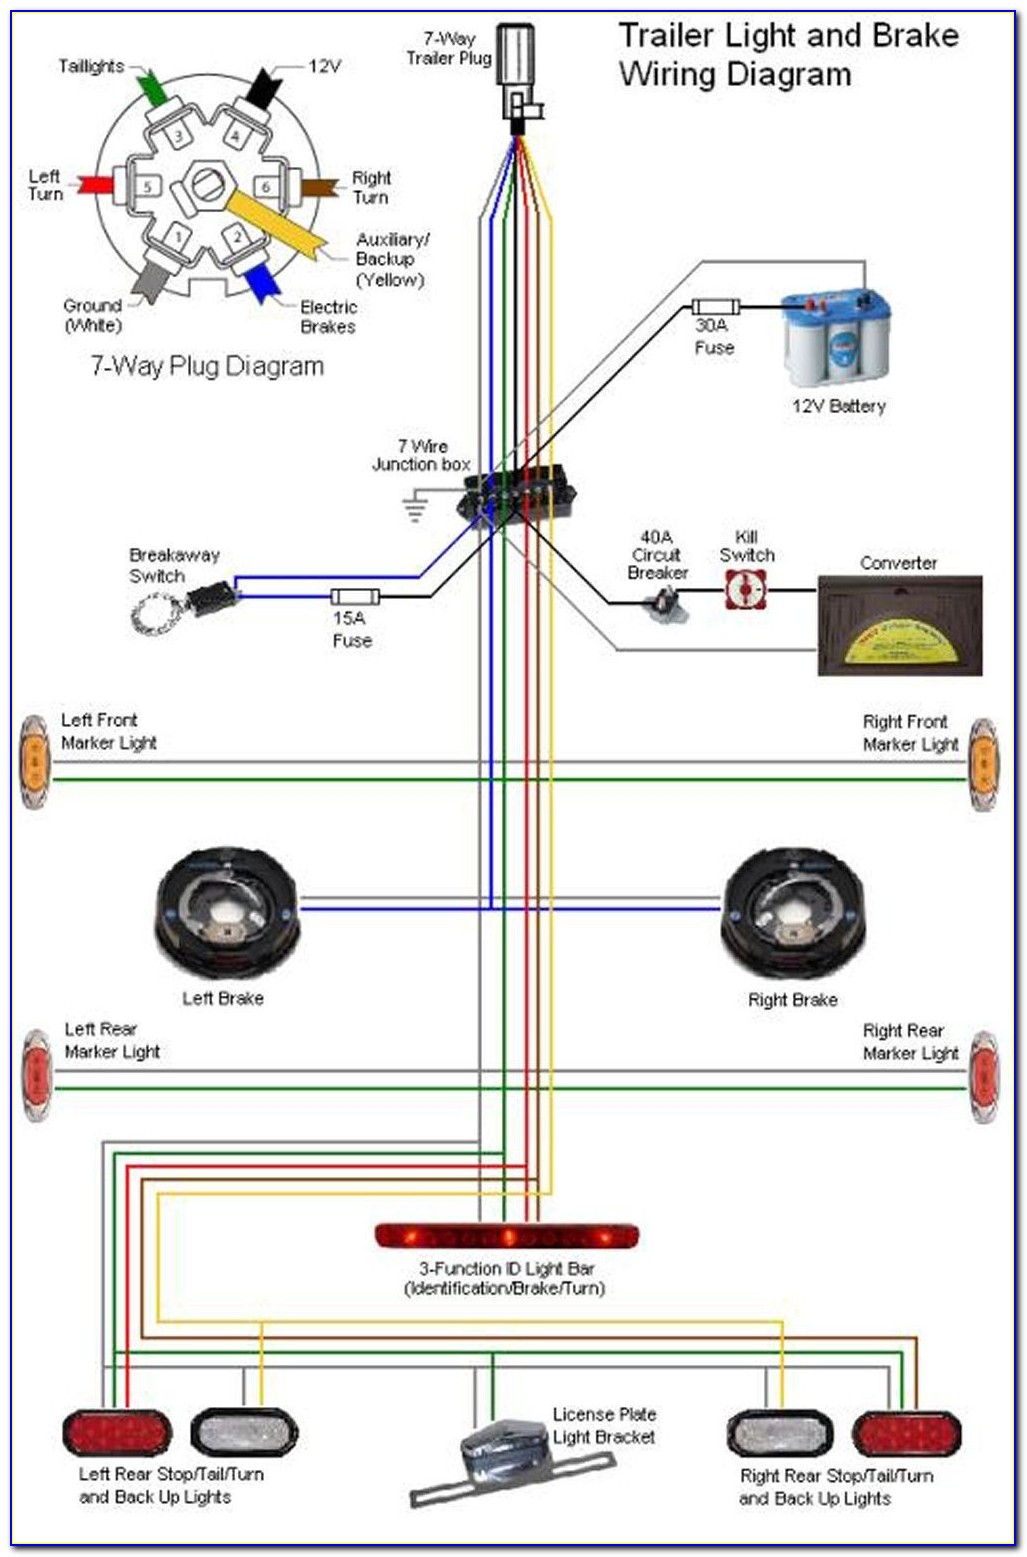 Trailer Electrical Connection Diagram